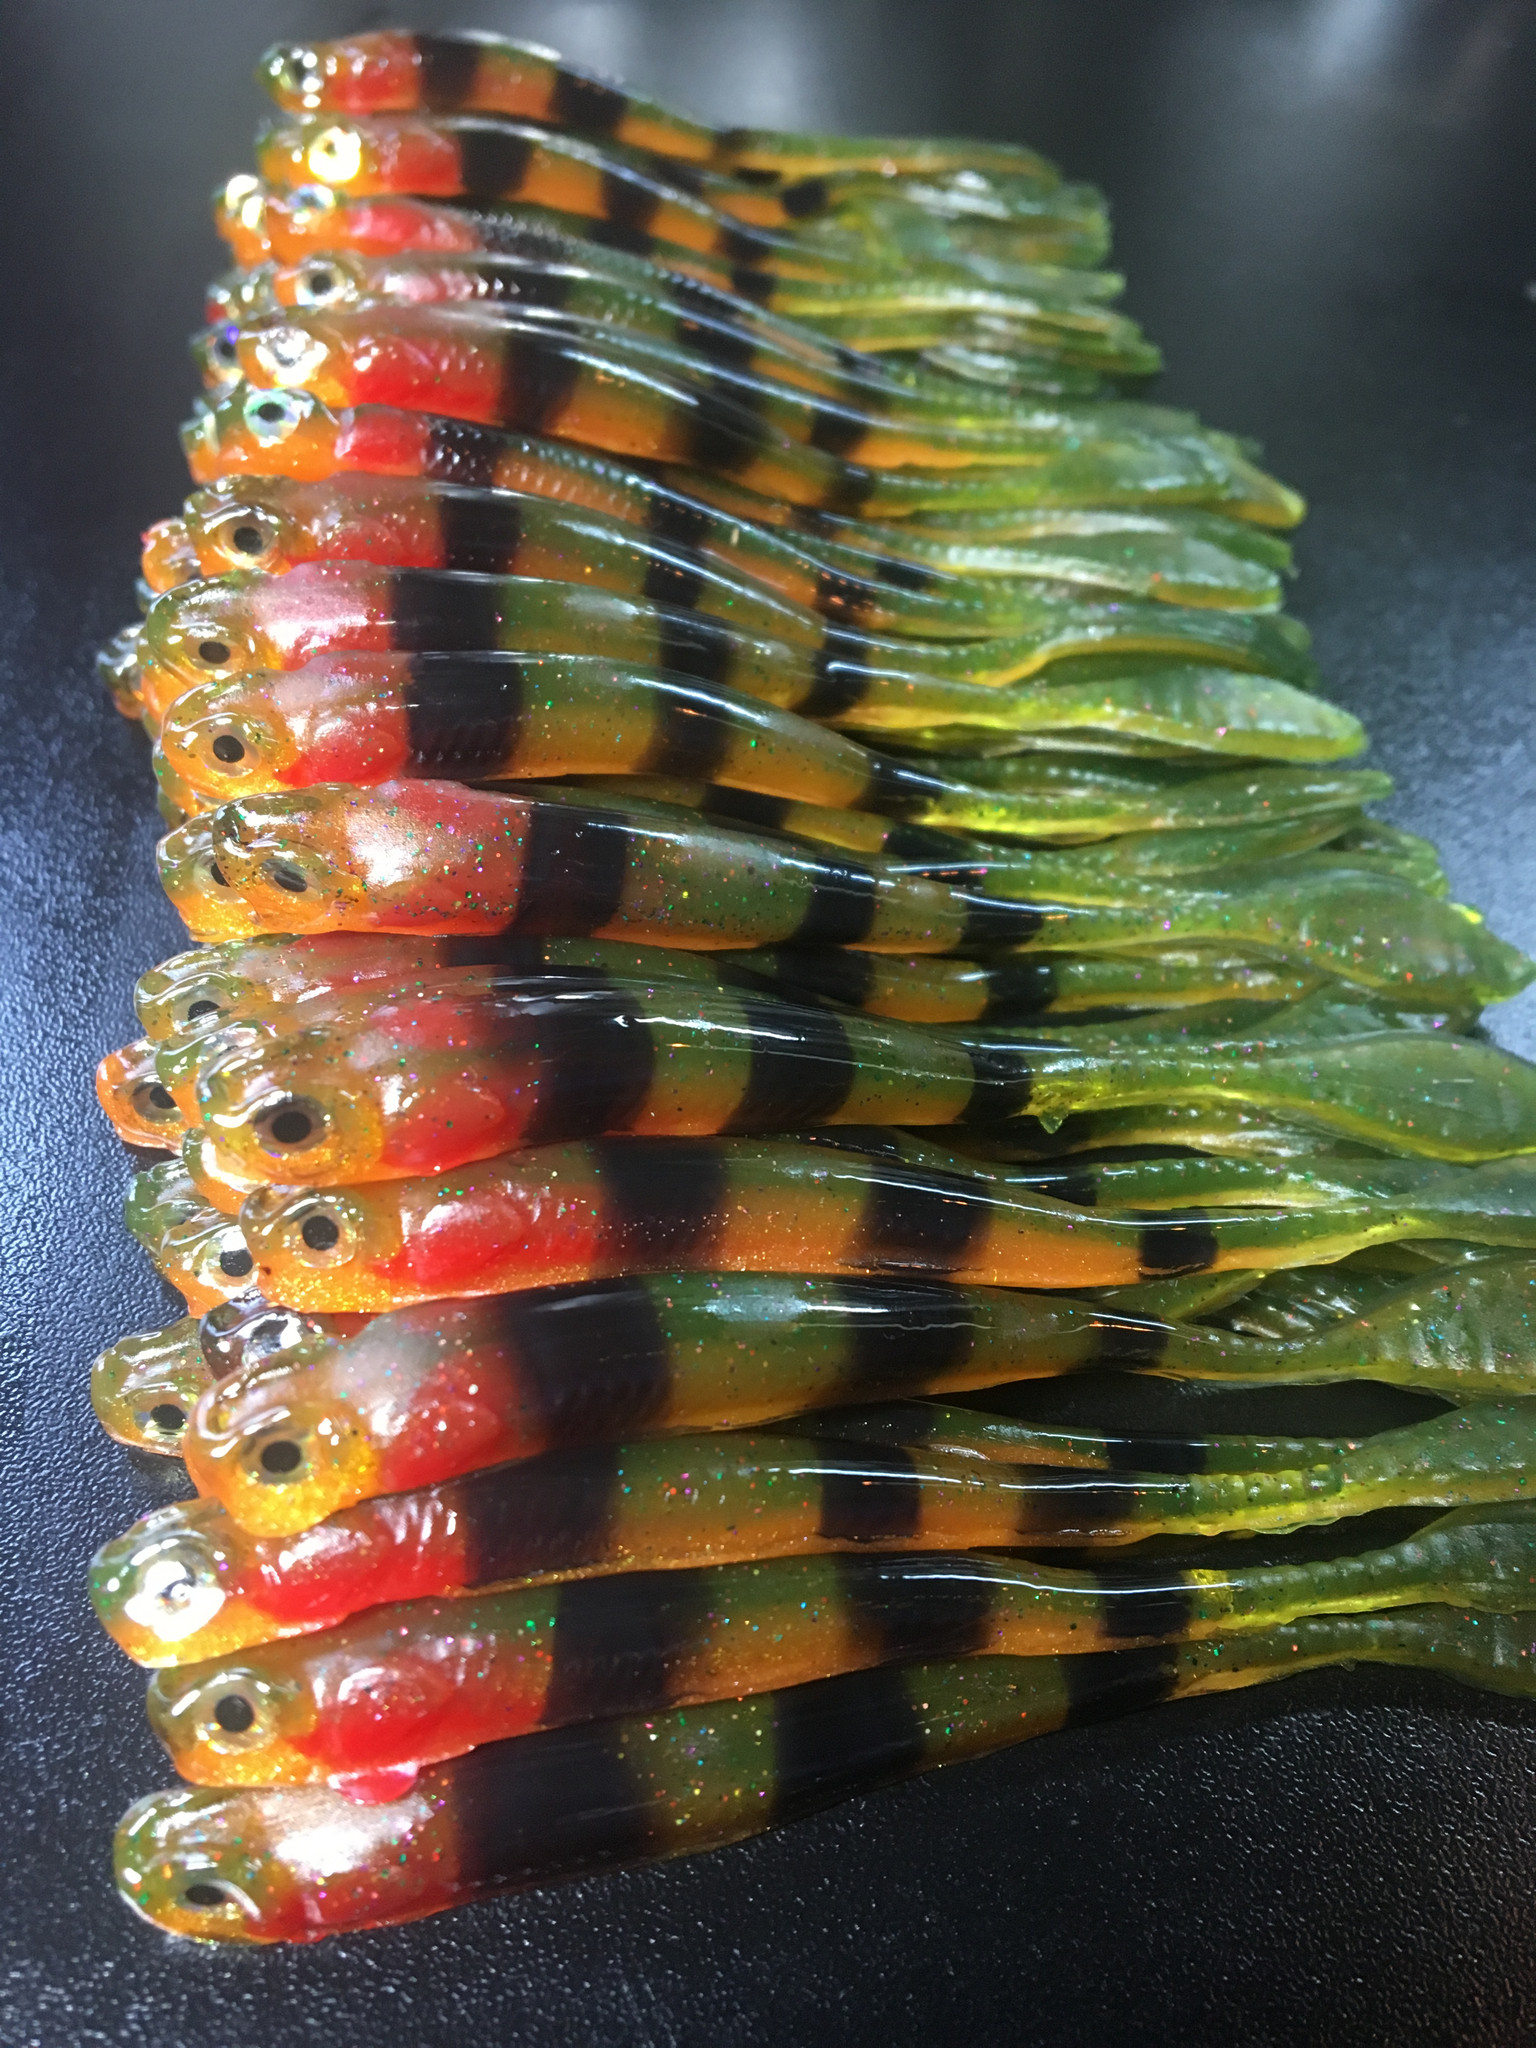 Limited Run* 3.5 Drop Shot Minnow Color: Bright Perch 30 count pack (Pre  Order 2-3 Weeks) - Paul Krew Custom Baits